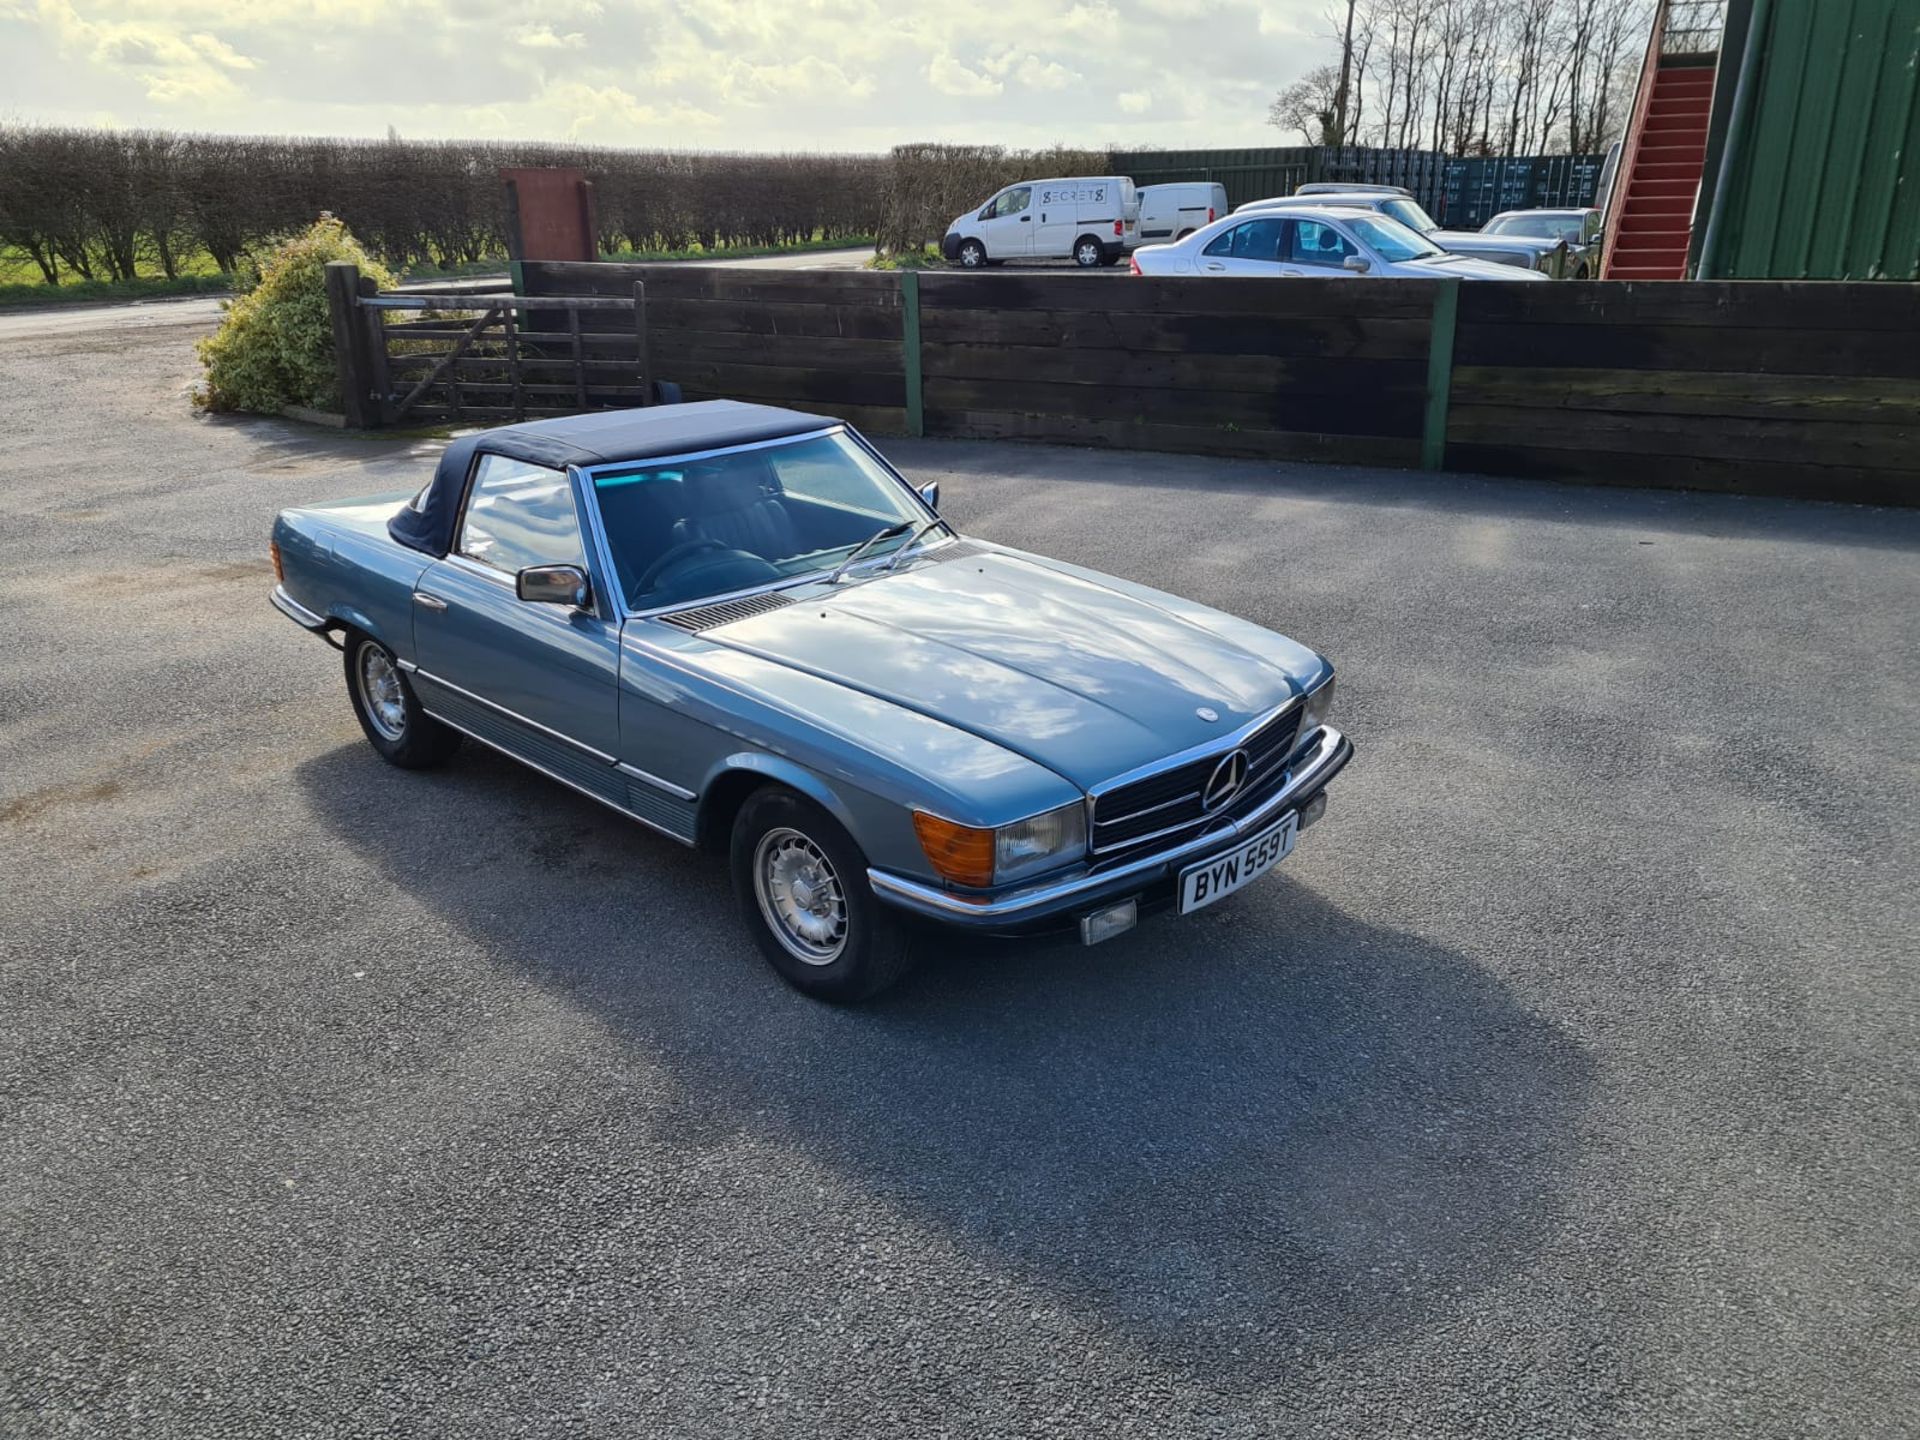 Stunning 1979 Mercedes Benz SL350 V8 With Factory Hardtop - Restored in 2018 - Image 7 of 22